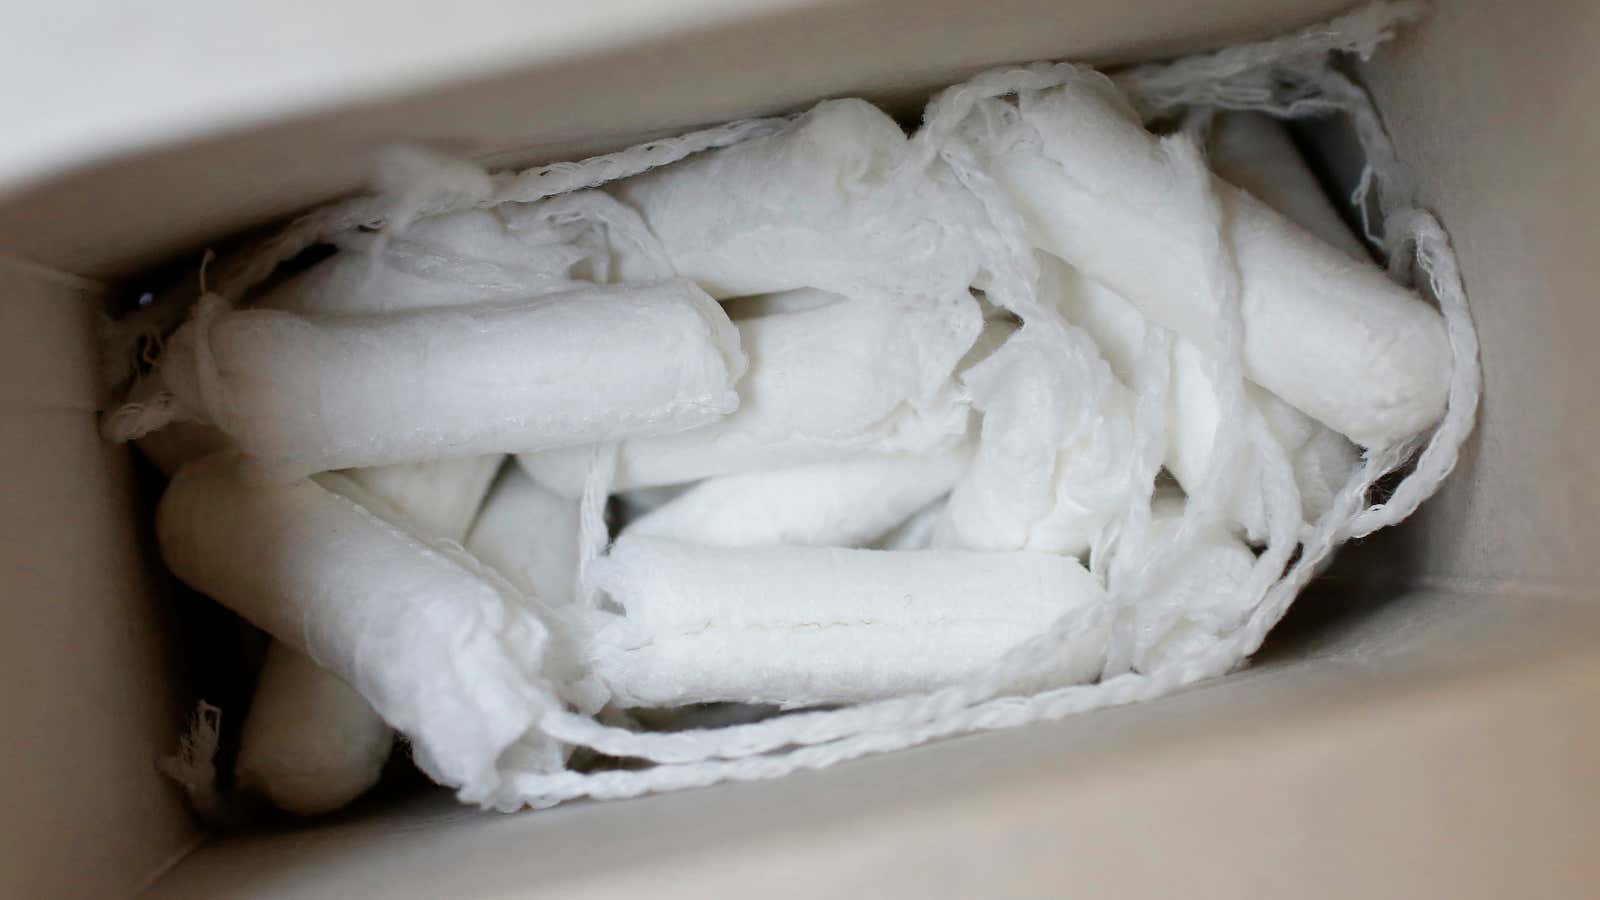 Why American women use applicator tampons and European women don't